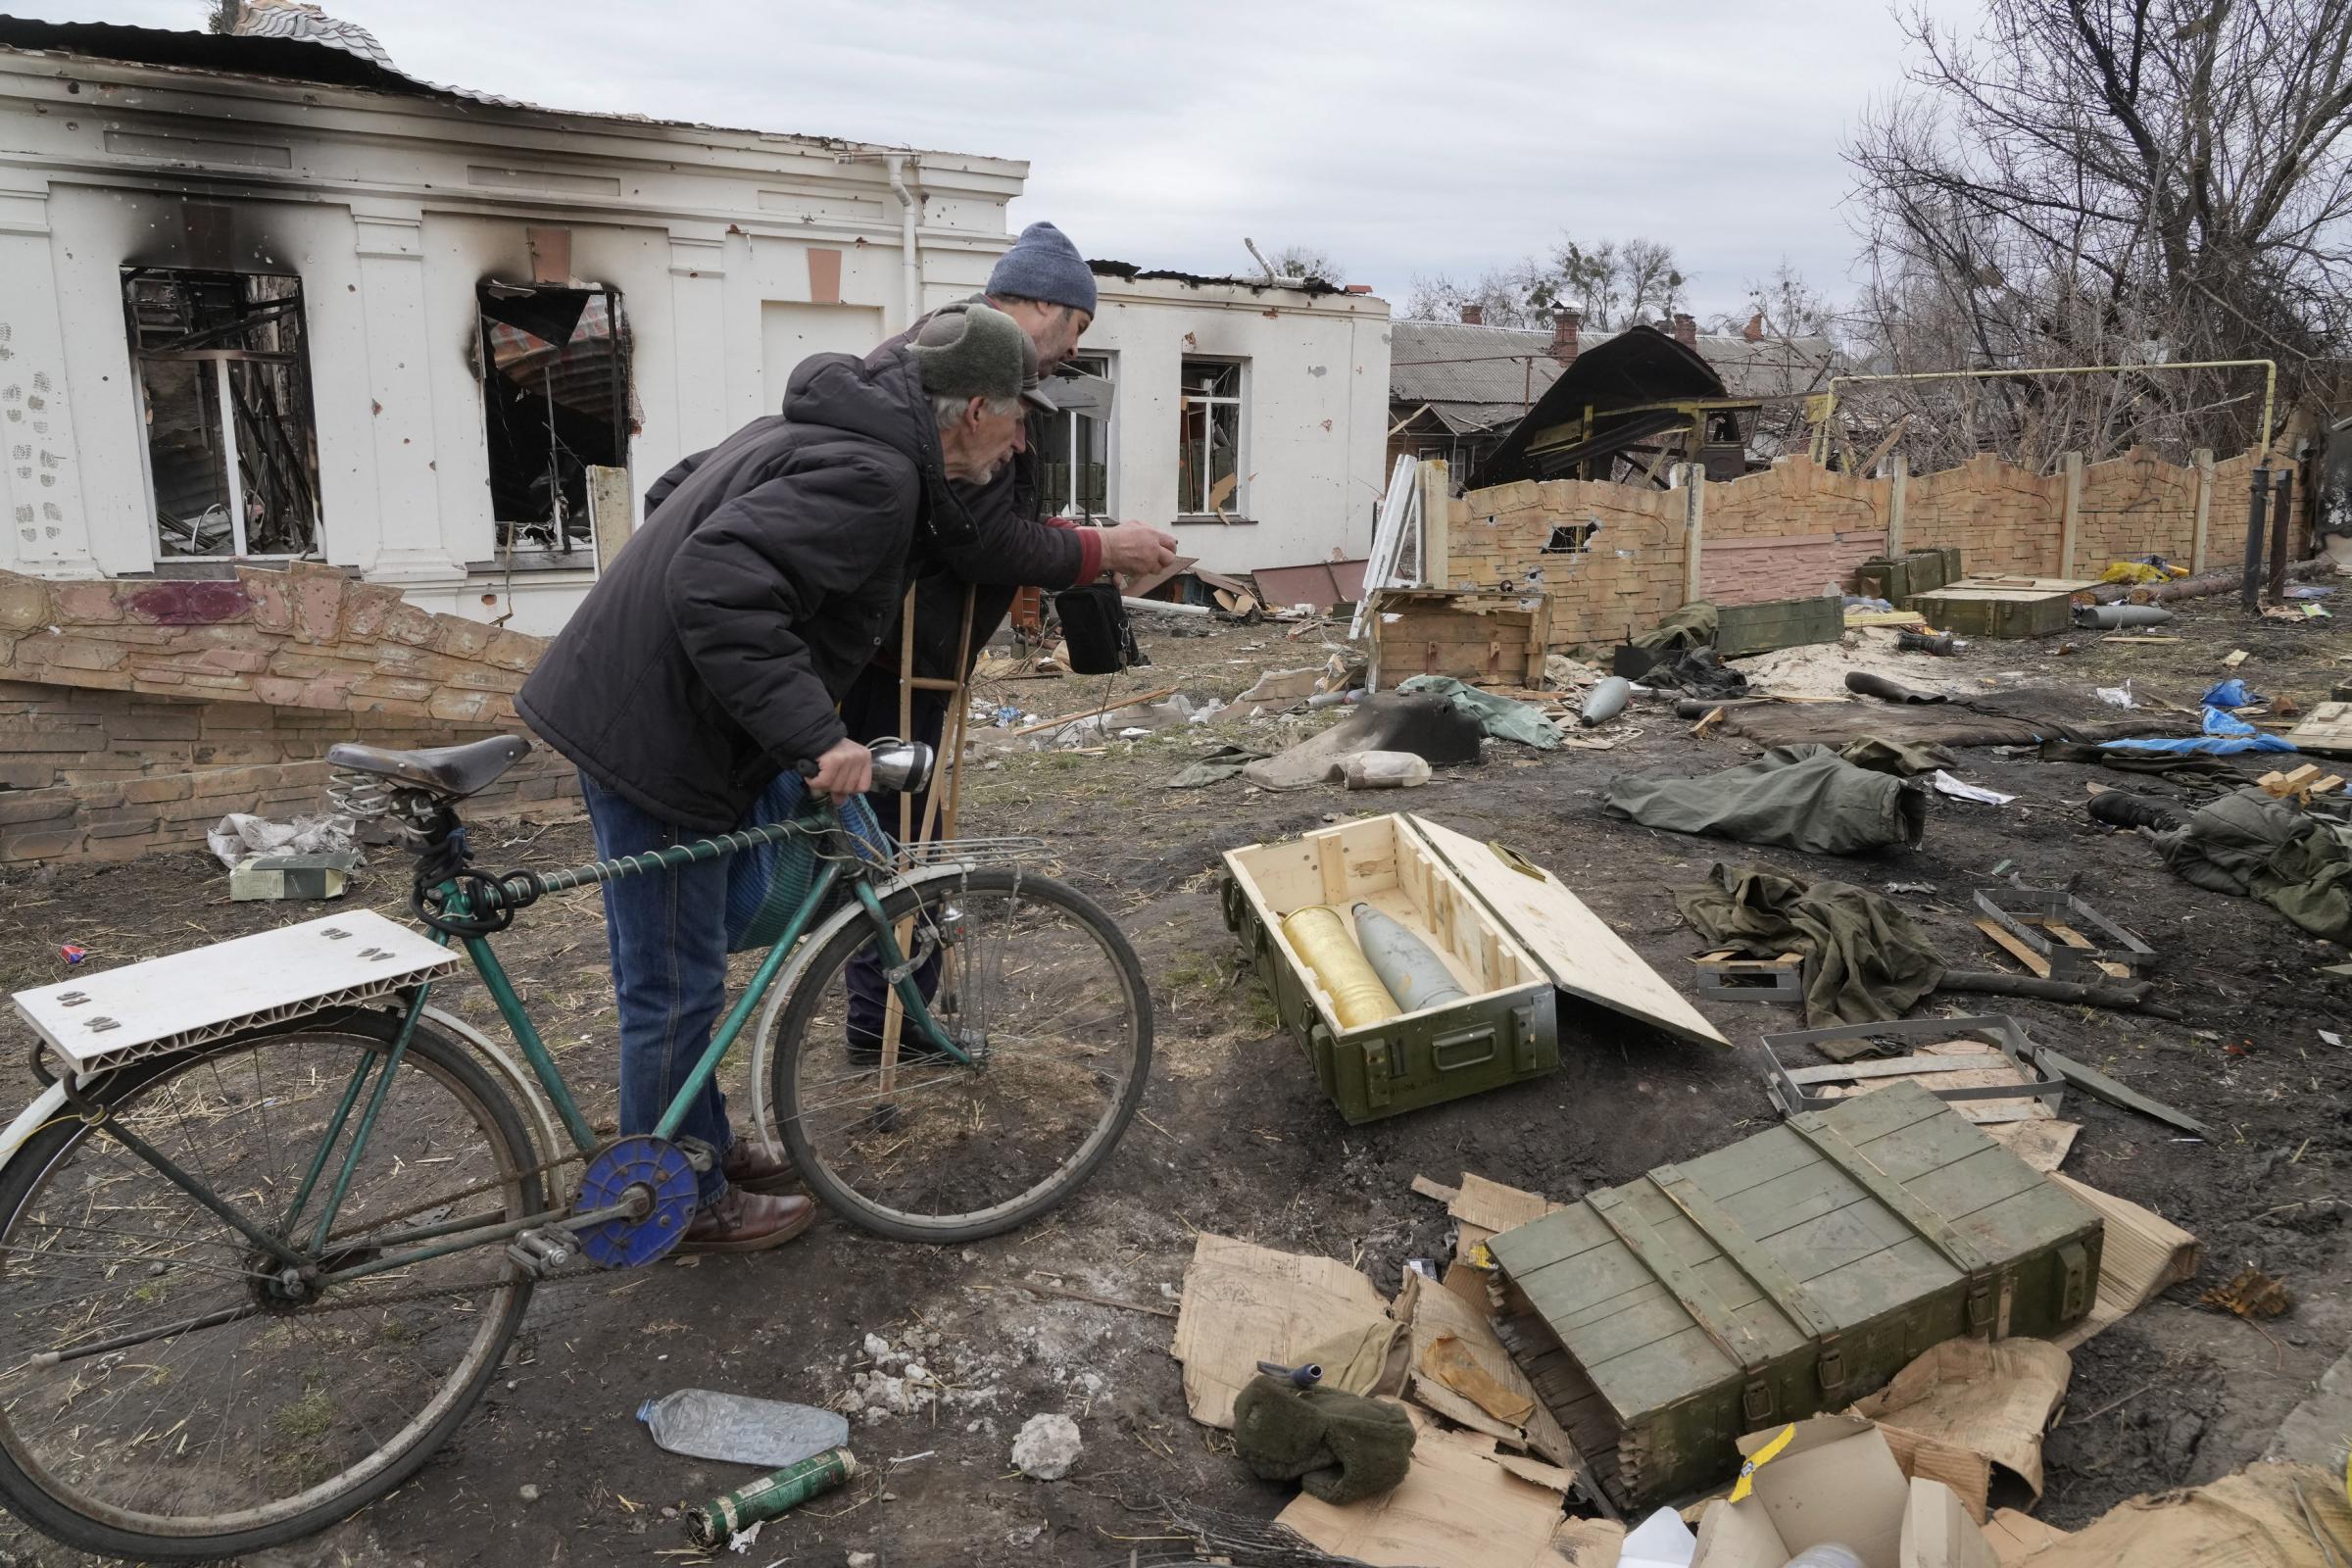 Local residents watch the shells after recent fighting in the town of Trostsyanets, about 400 km (250 miles) east of the capital kyiv, Ukraine.